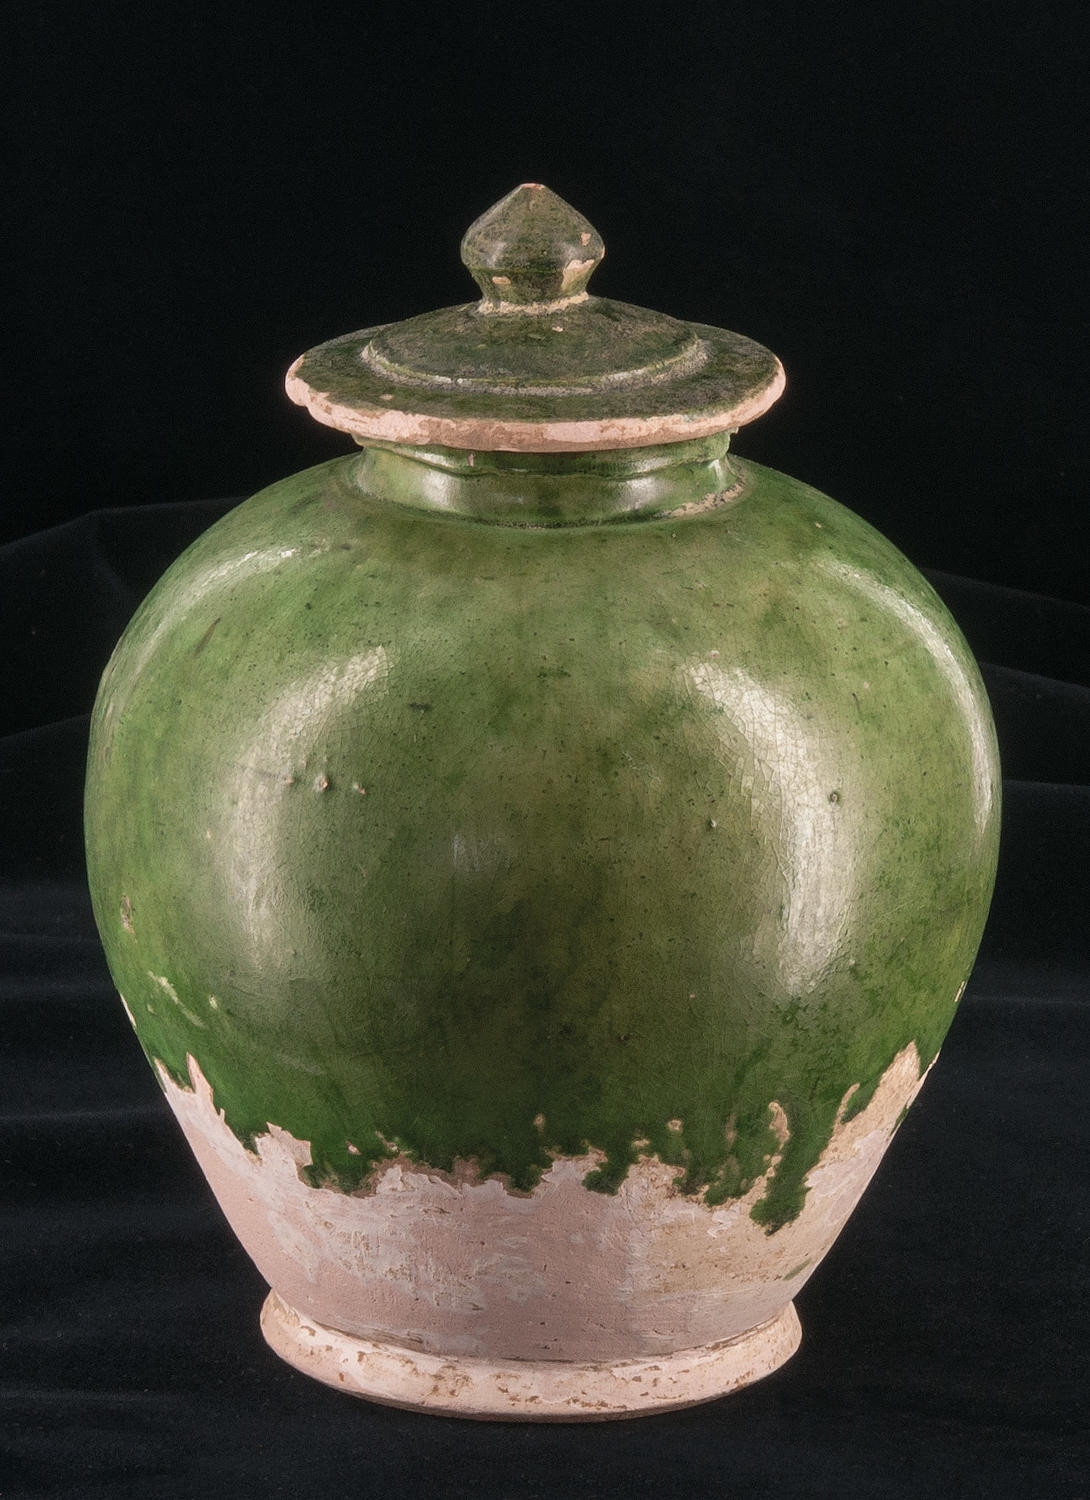 29 Perfect Goryeo Celadon Vase 2024 free download goryeo celadon vase of numisbids emporium hamburg auction 81 83 23 26 oct 2018 inside a fine green glaze pottery jar and cover this jar is of baluster form surmounted by a very short neck wi